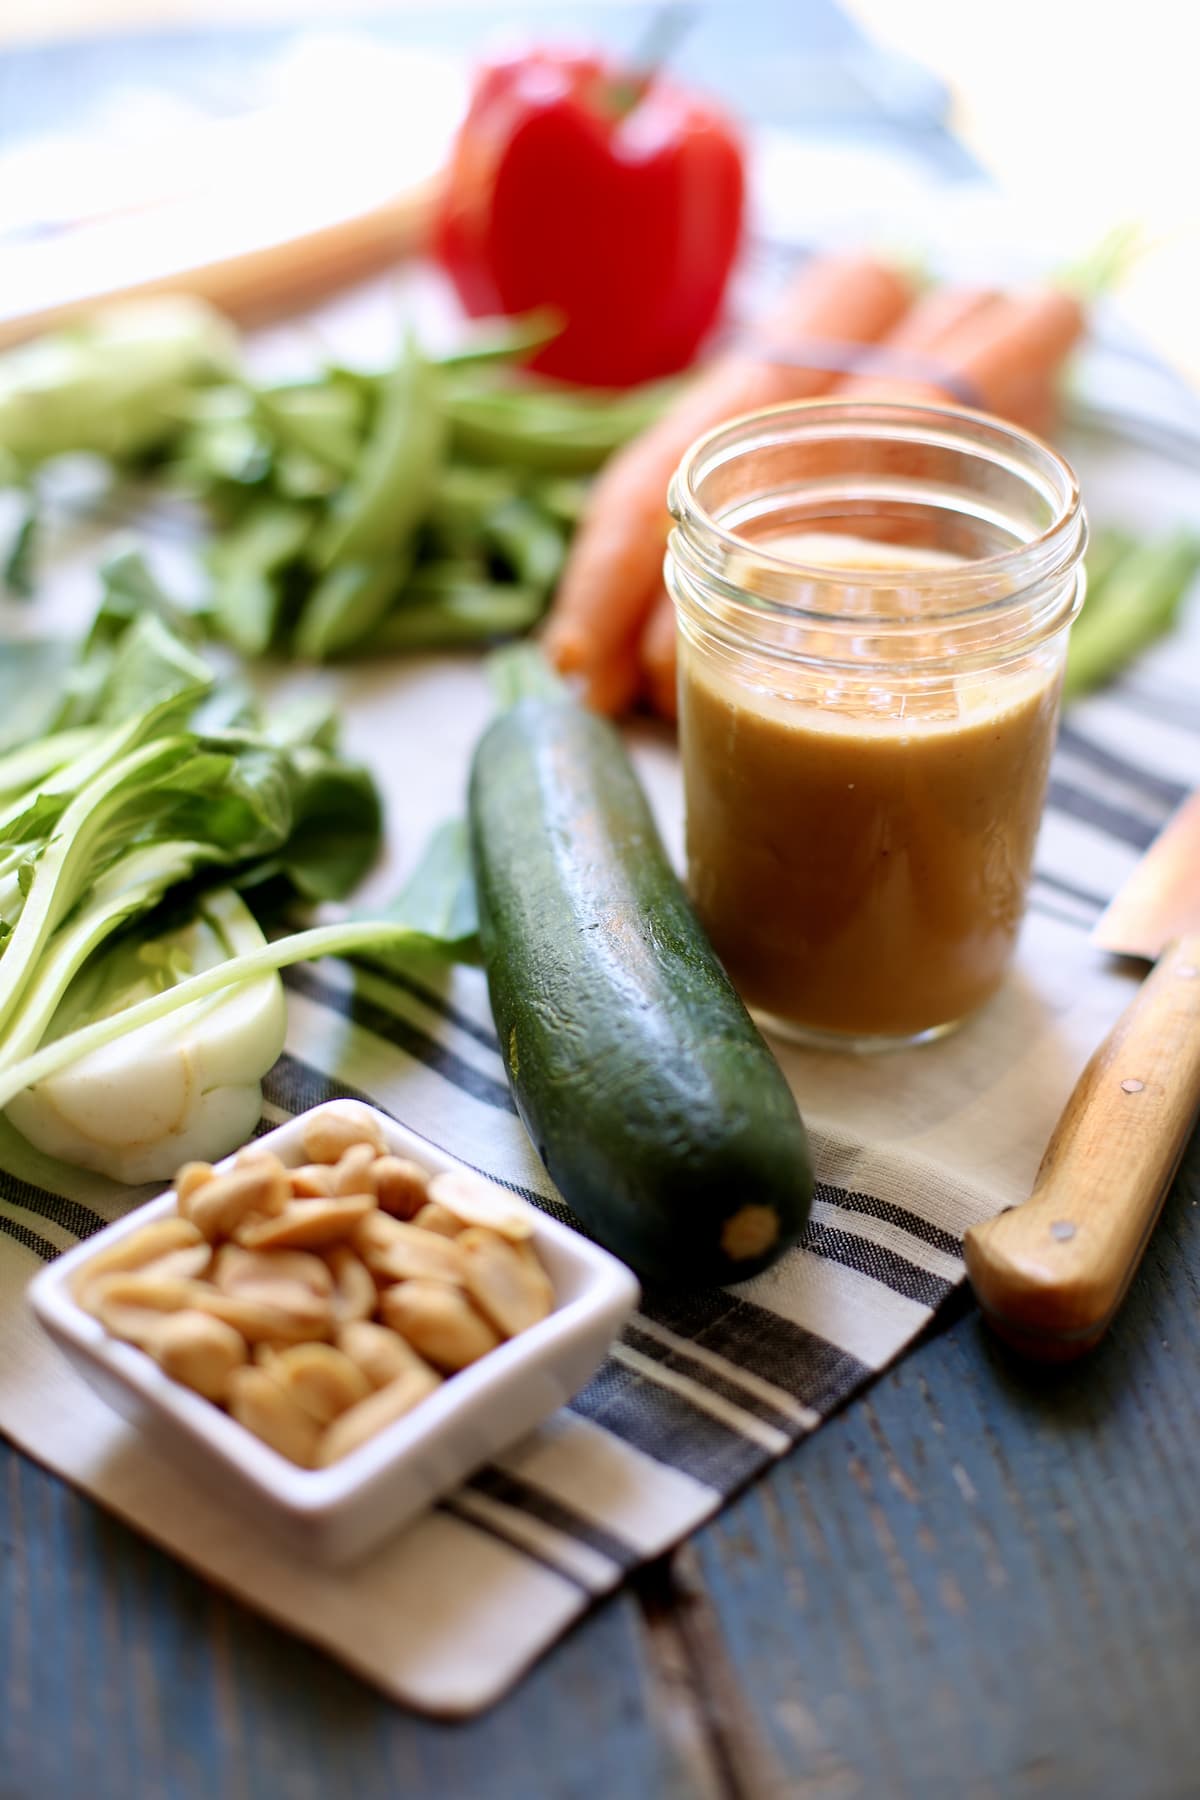 a table with a striped tablecloth and a canning jar of peanut sauce, surrounded by fresh vegetatables and a small bowl of peanuts